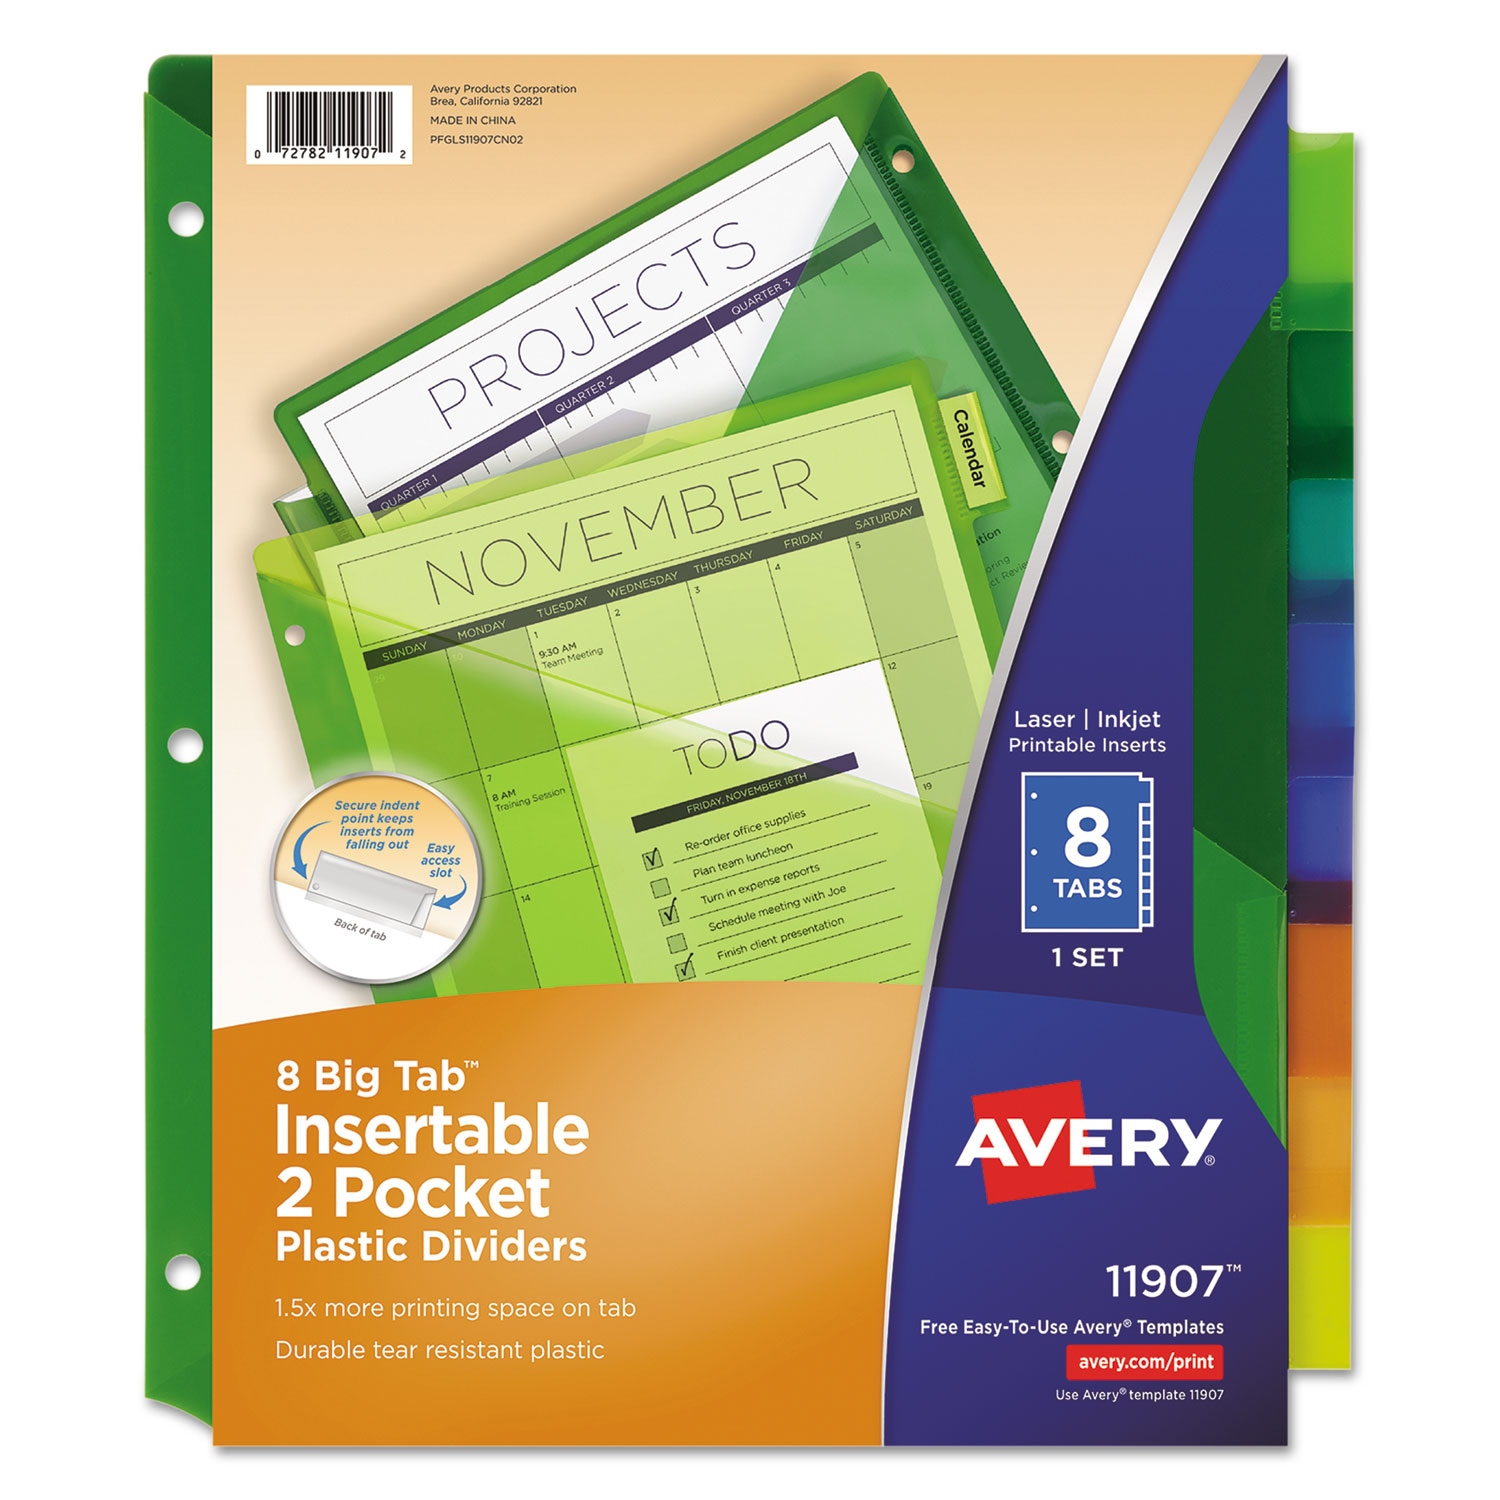 Avery Two Pocket Insertable Plastic Dividers 8 Tabs 